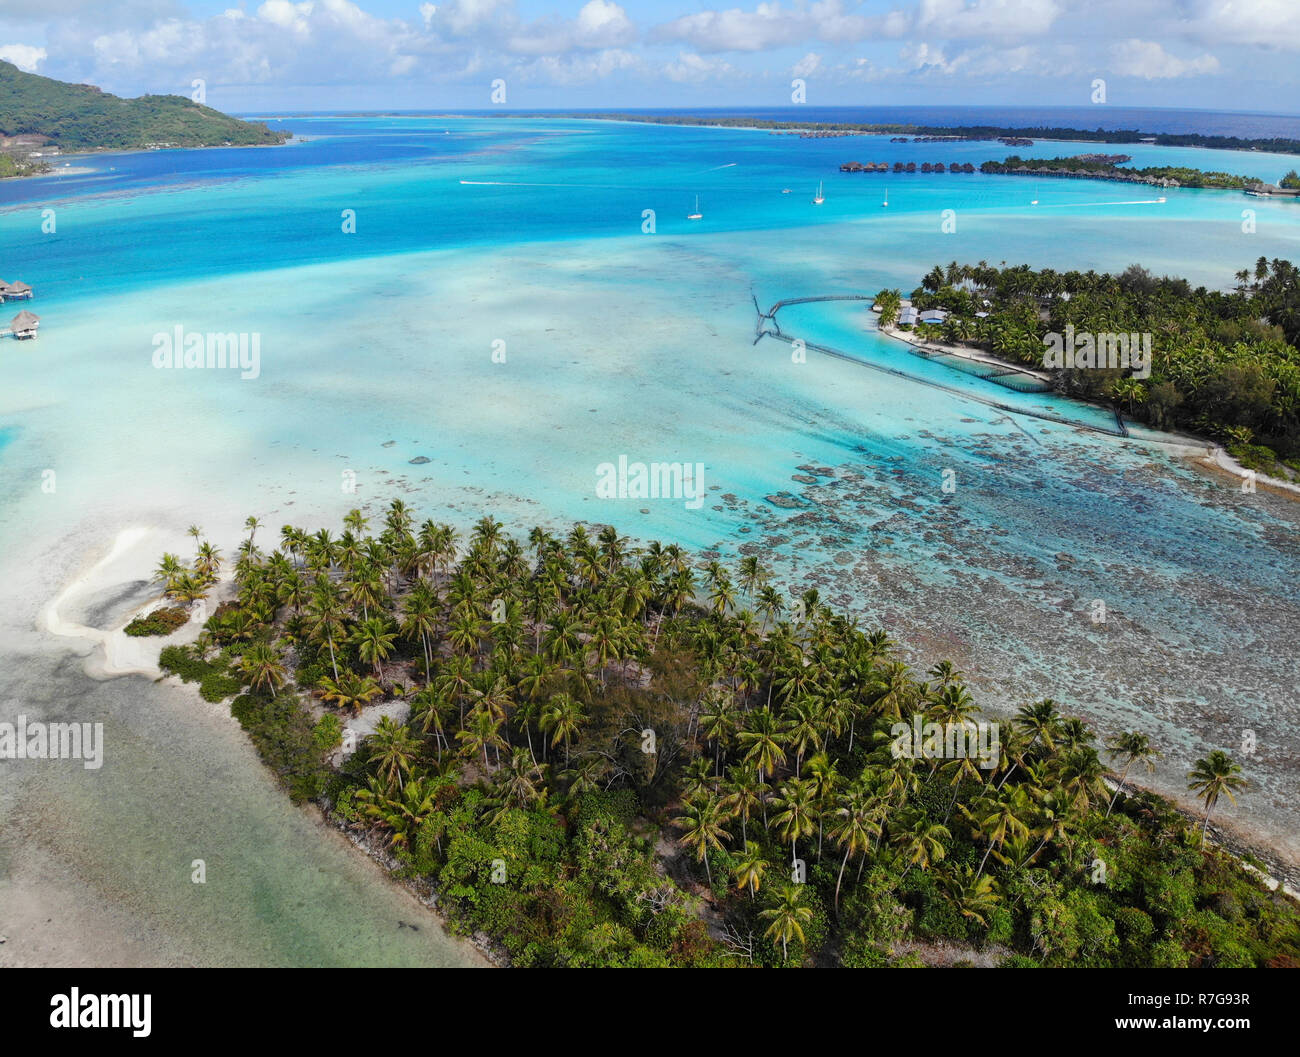 Aerial panoramic landscape view of the island of Bora Bora in French Polynesia with the Mont Otemanu mountain surrounded by a turquoise lagoon, motu a Stock Photo